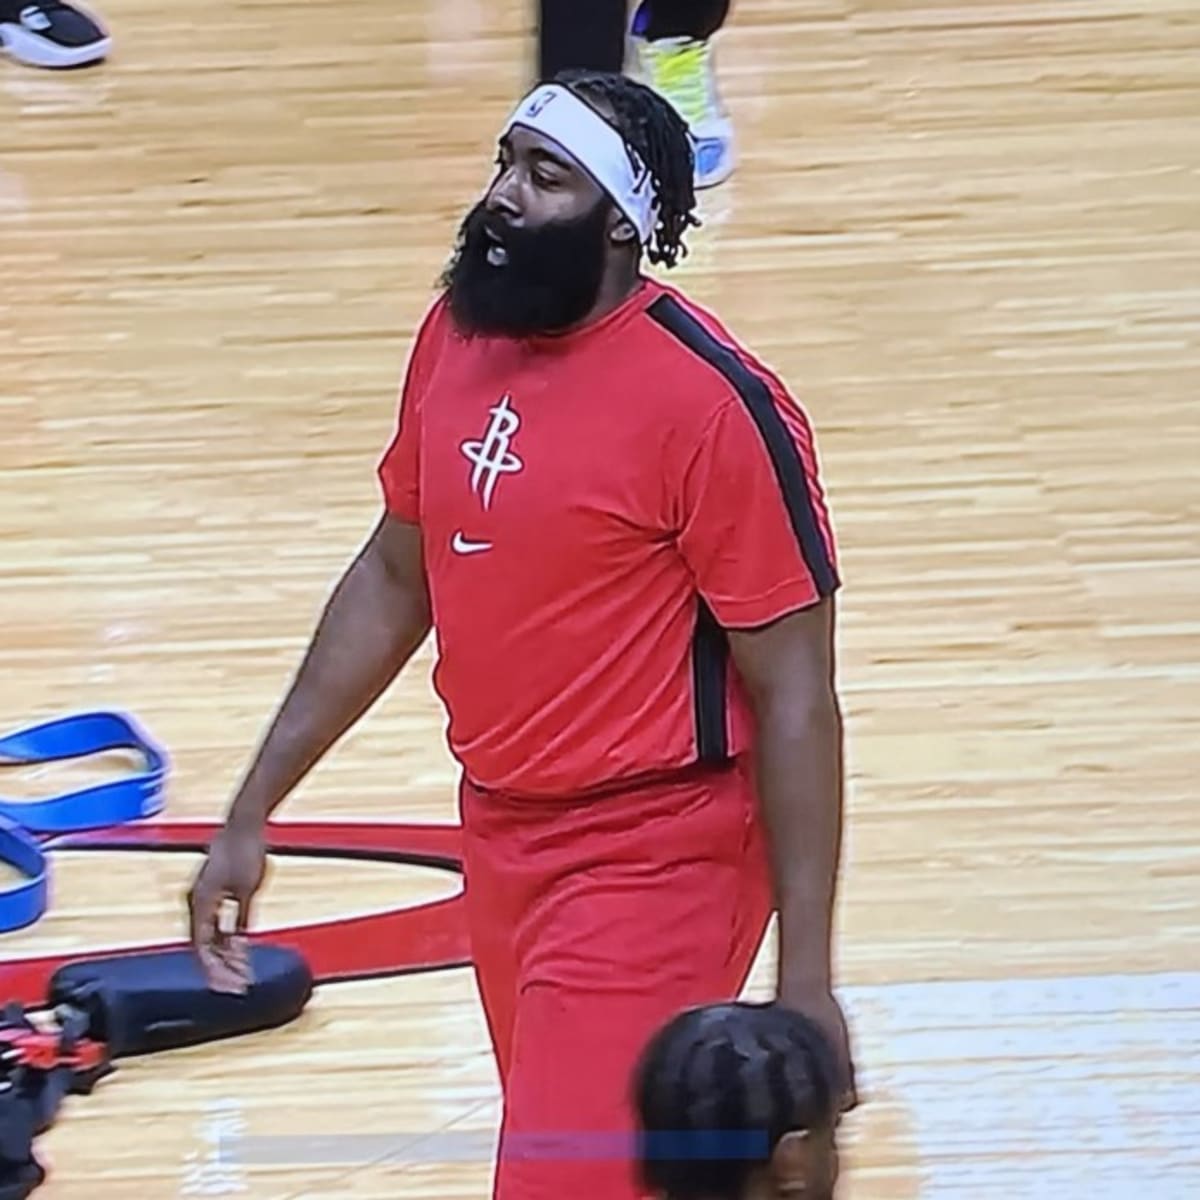 NBA Buzz - James Harden wore THIS before tonight's game against